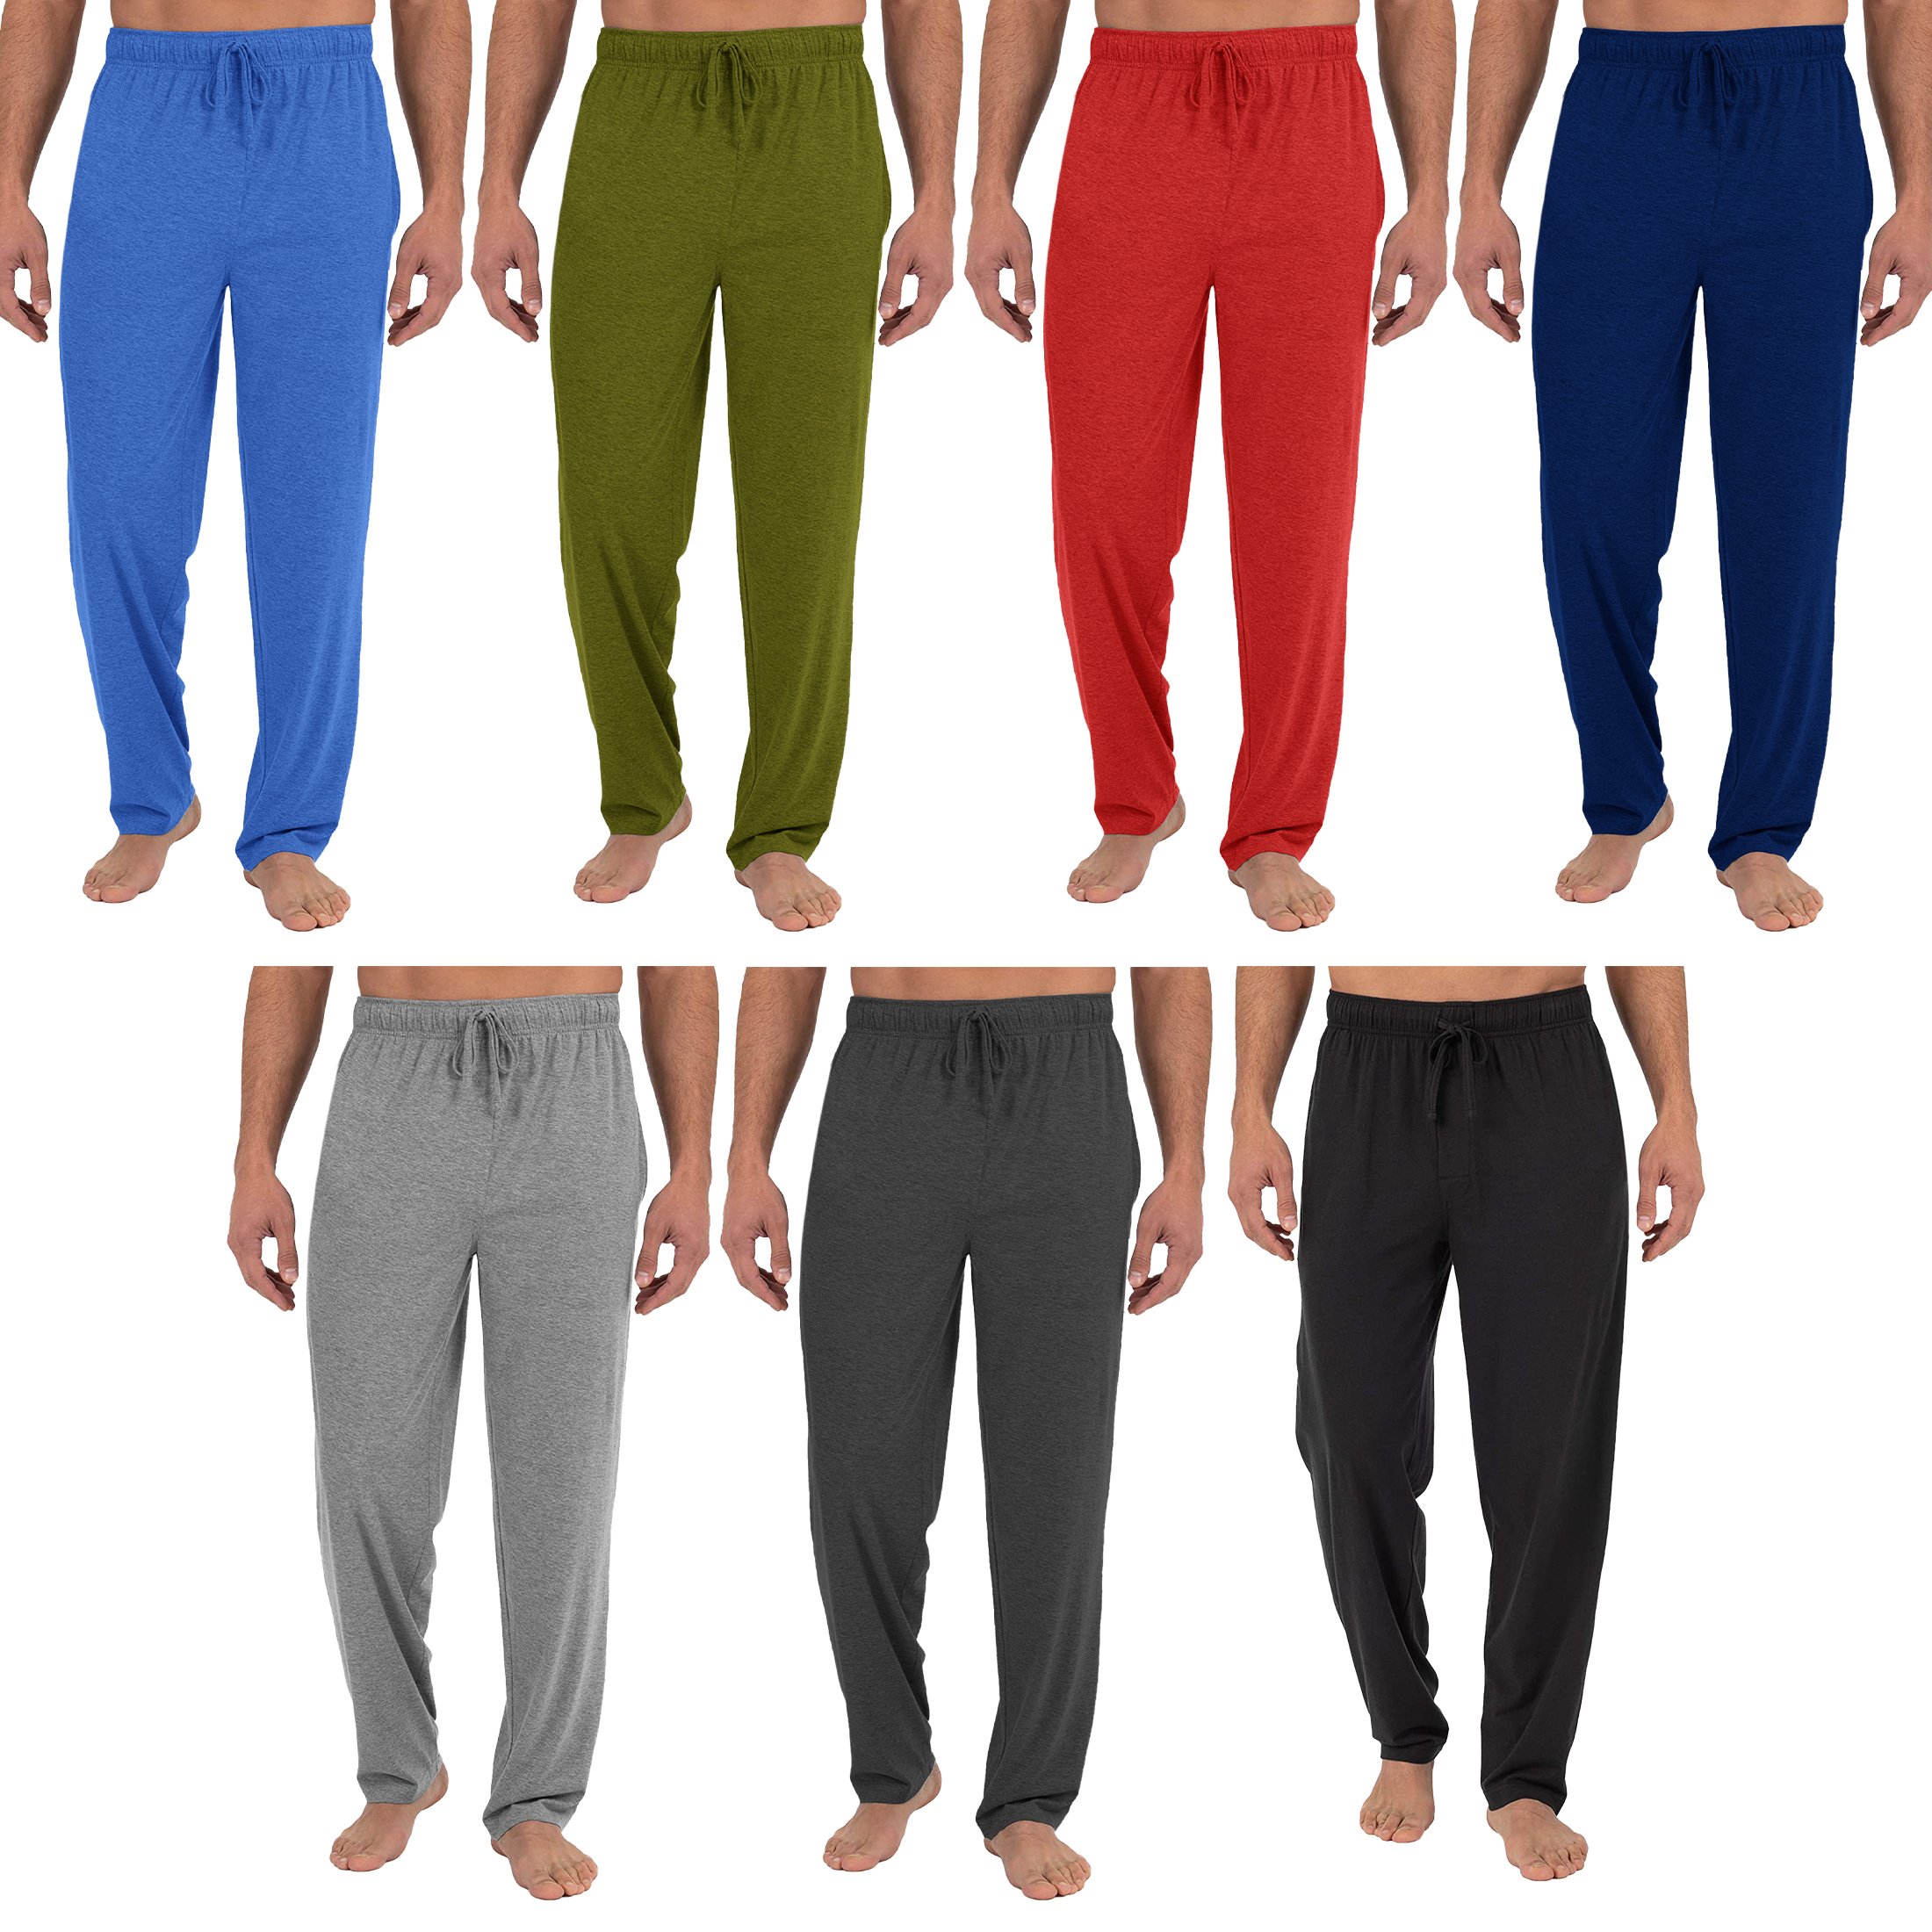 3-Pack: Men's Soft Jersey Knit Long Lounge Sleep Pants With Pockets - Solid, Small